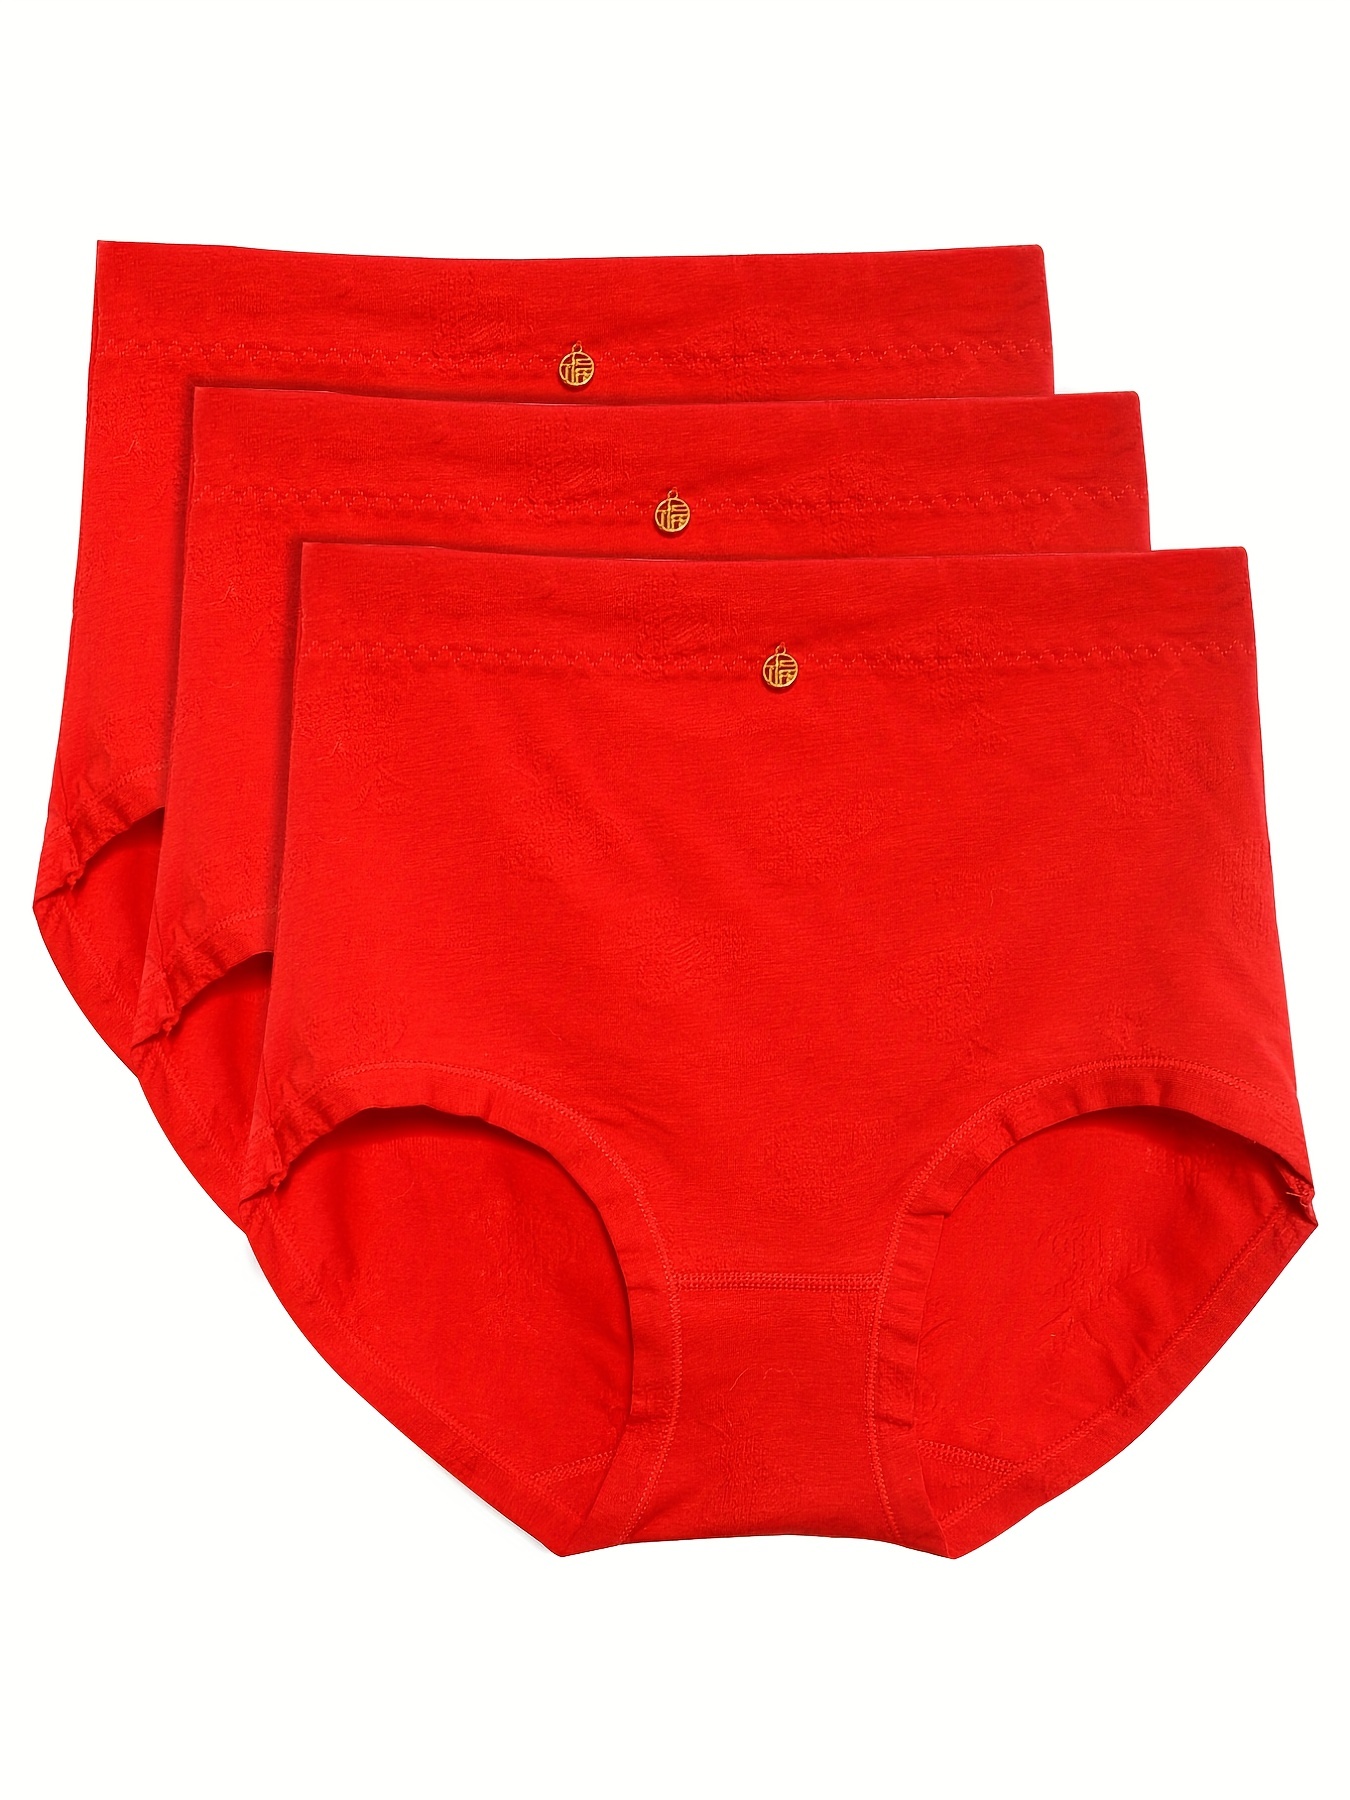 Women's Red Underwear & Intimates + FREE SHIPPING, Clothing